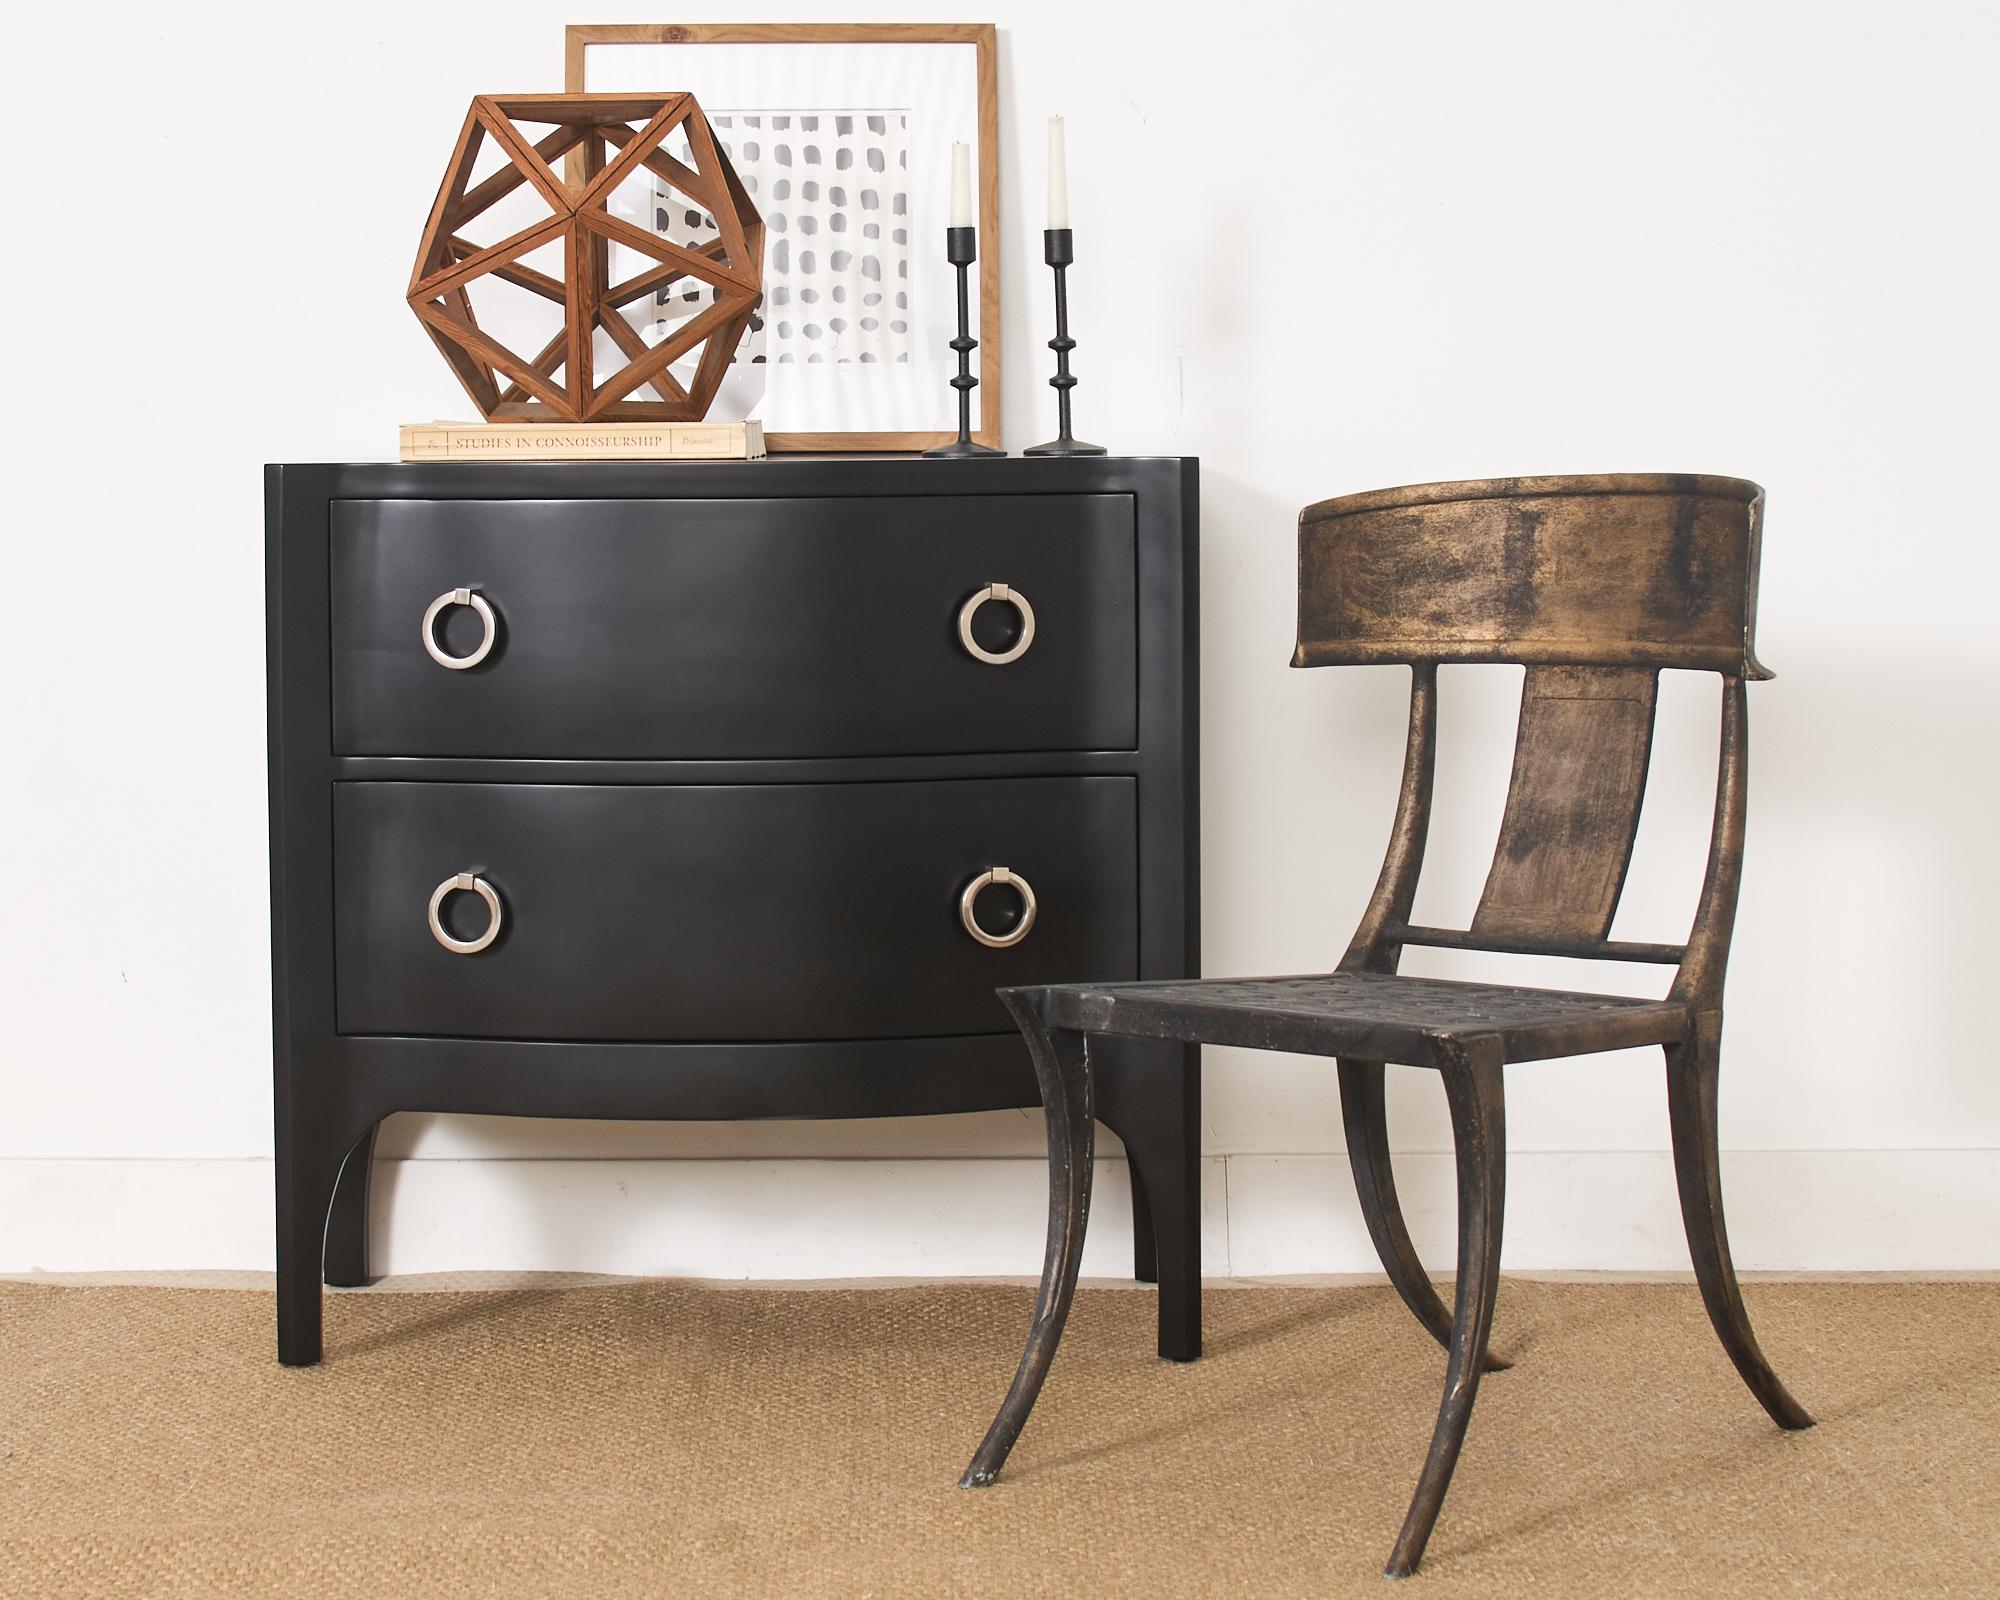 Dramatic pair of Trapu commodes or chests of drawers by Scala Luxury Los Angeles, CA. The chests feature a matte black lacquered finish with a rich mahogany interior that showcases the woodgrains. The commodes have a serpentine or bow front fitted